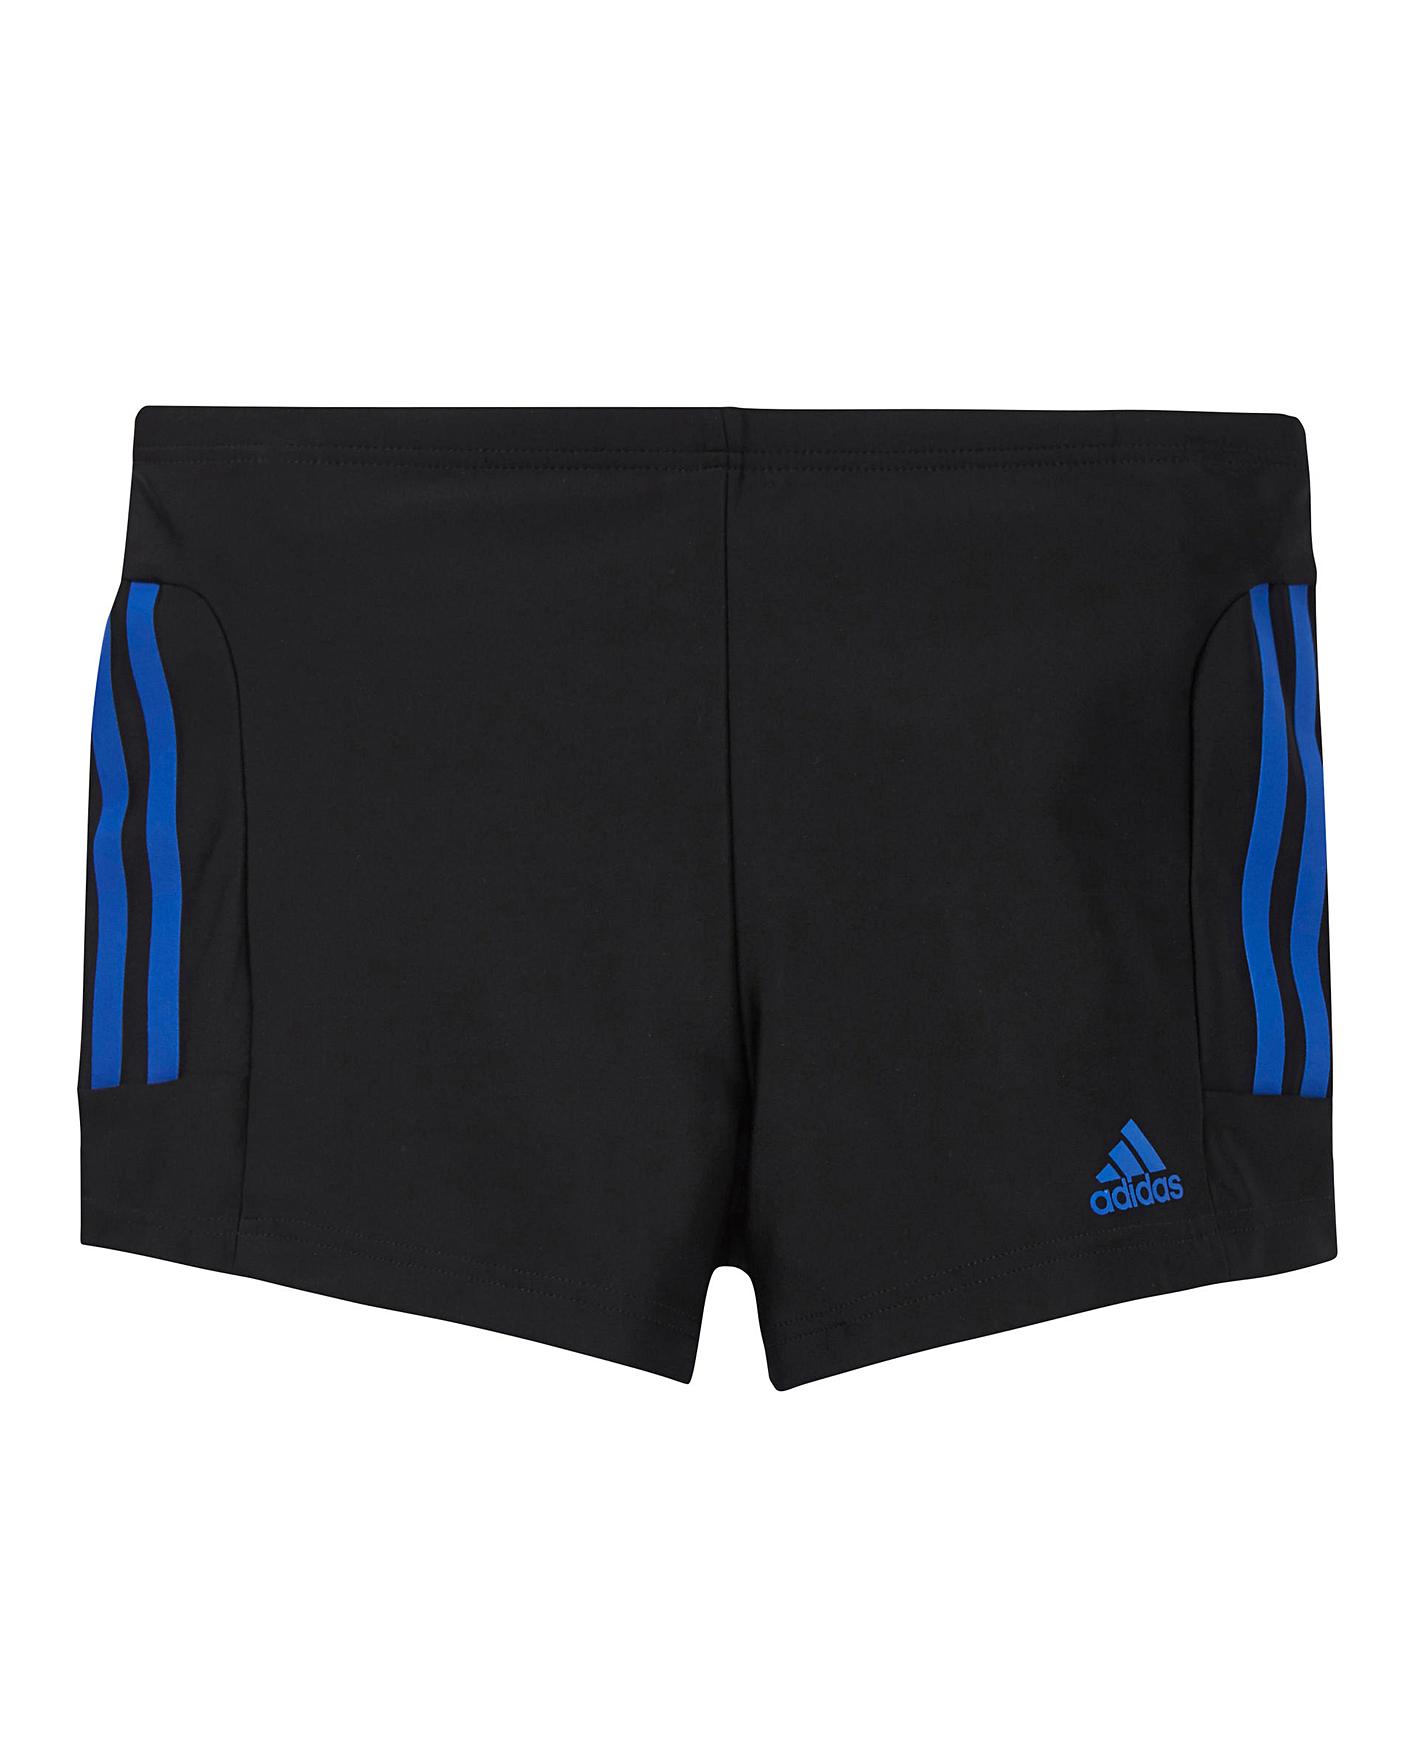 adidas Swimming Trunk | Oxendales